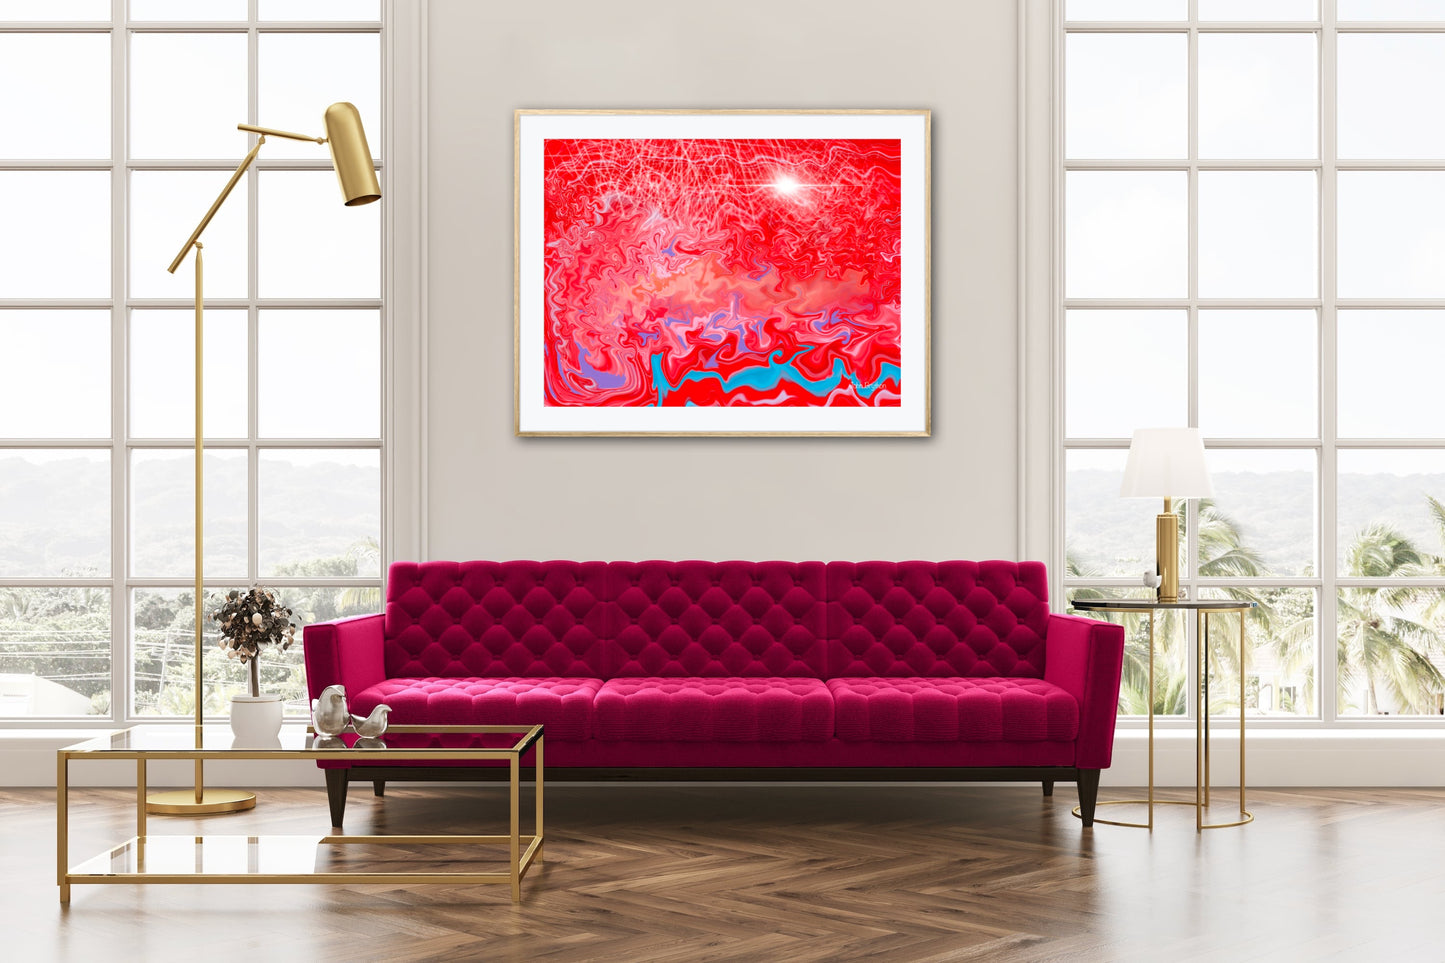 Red Abstract Planet Mars Framed Print